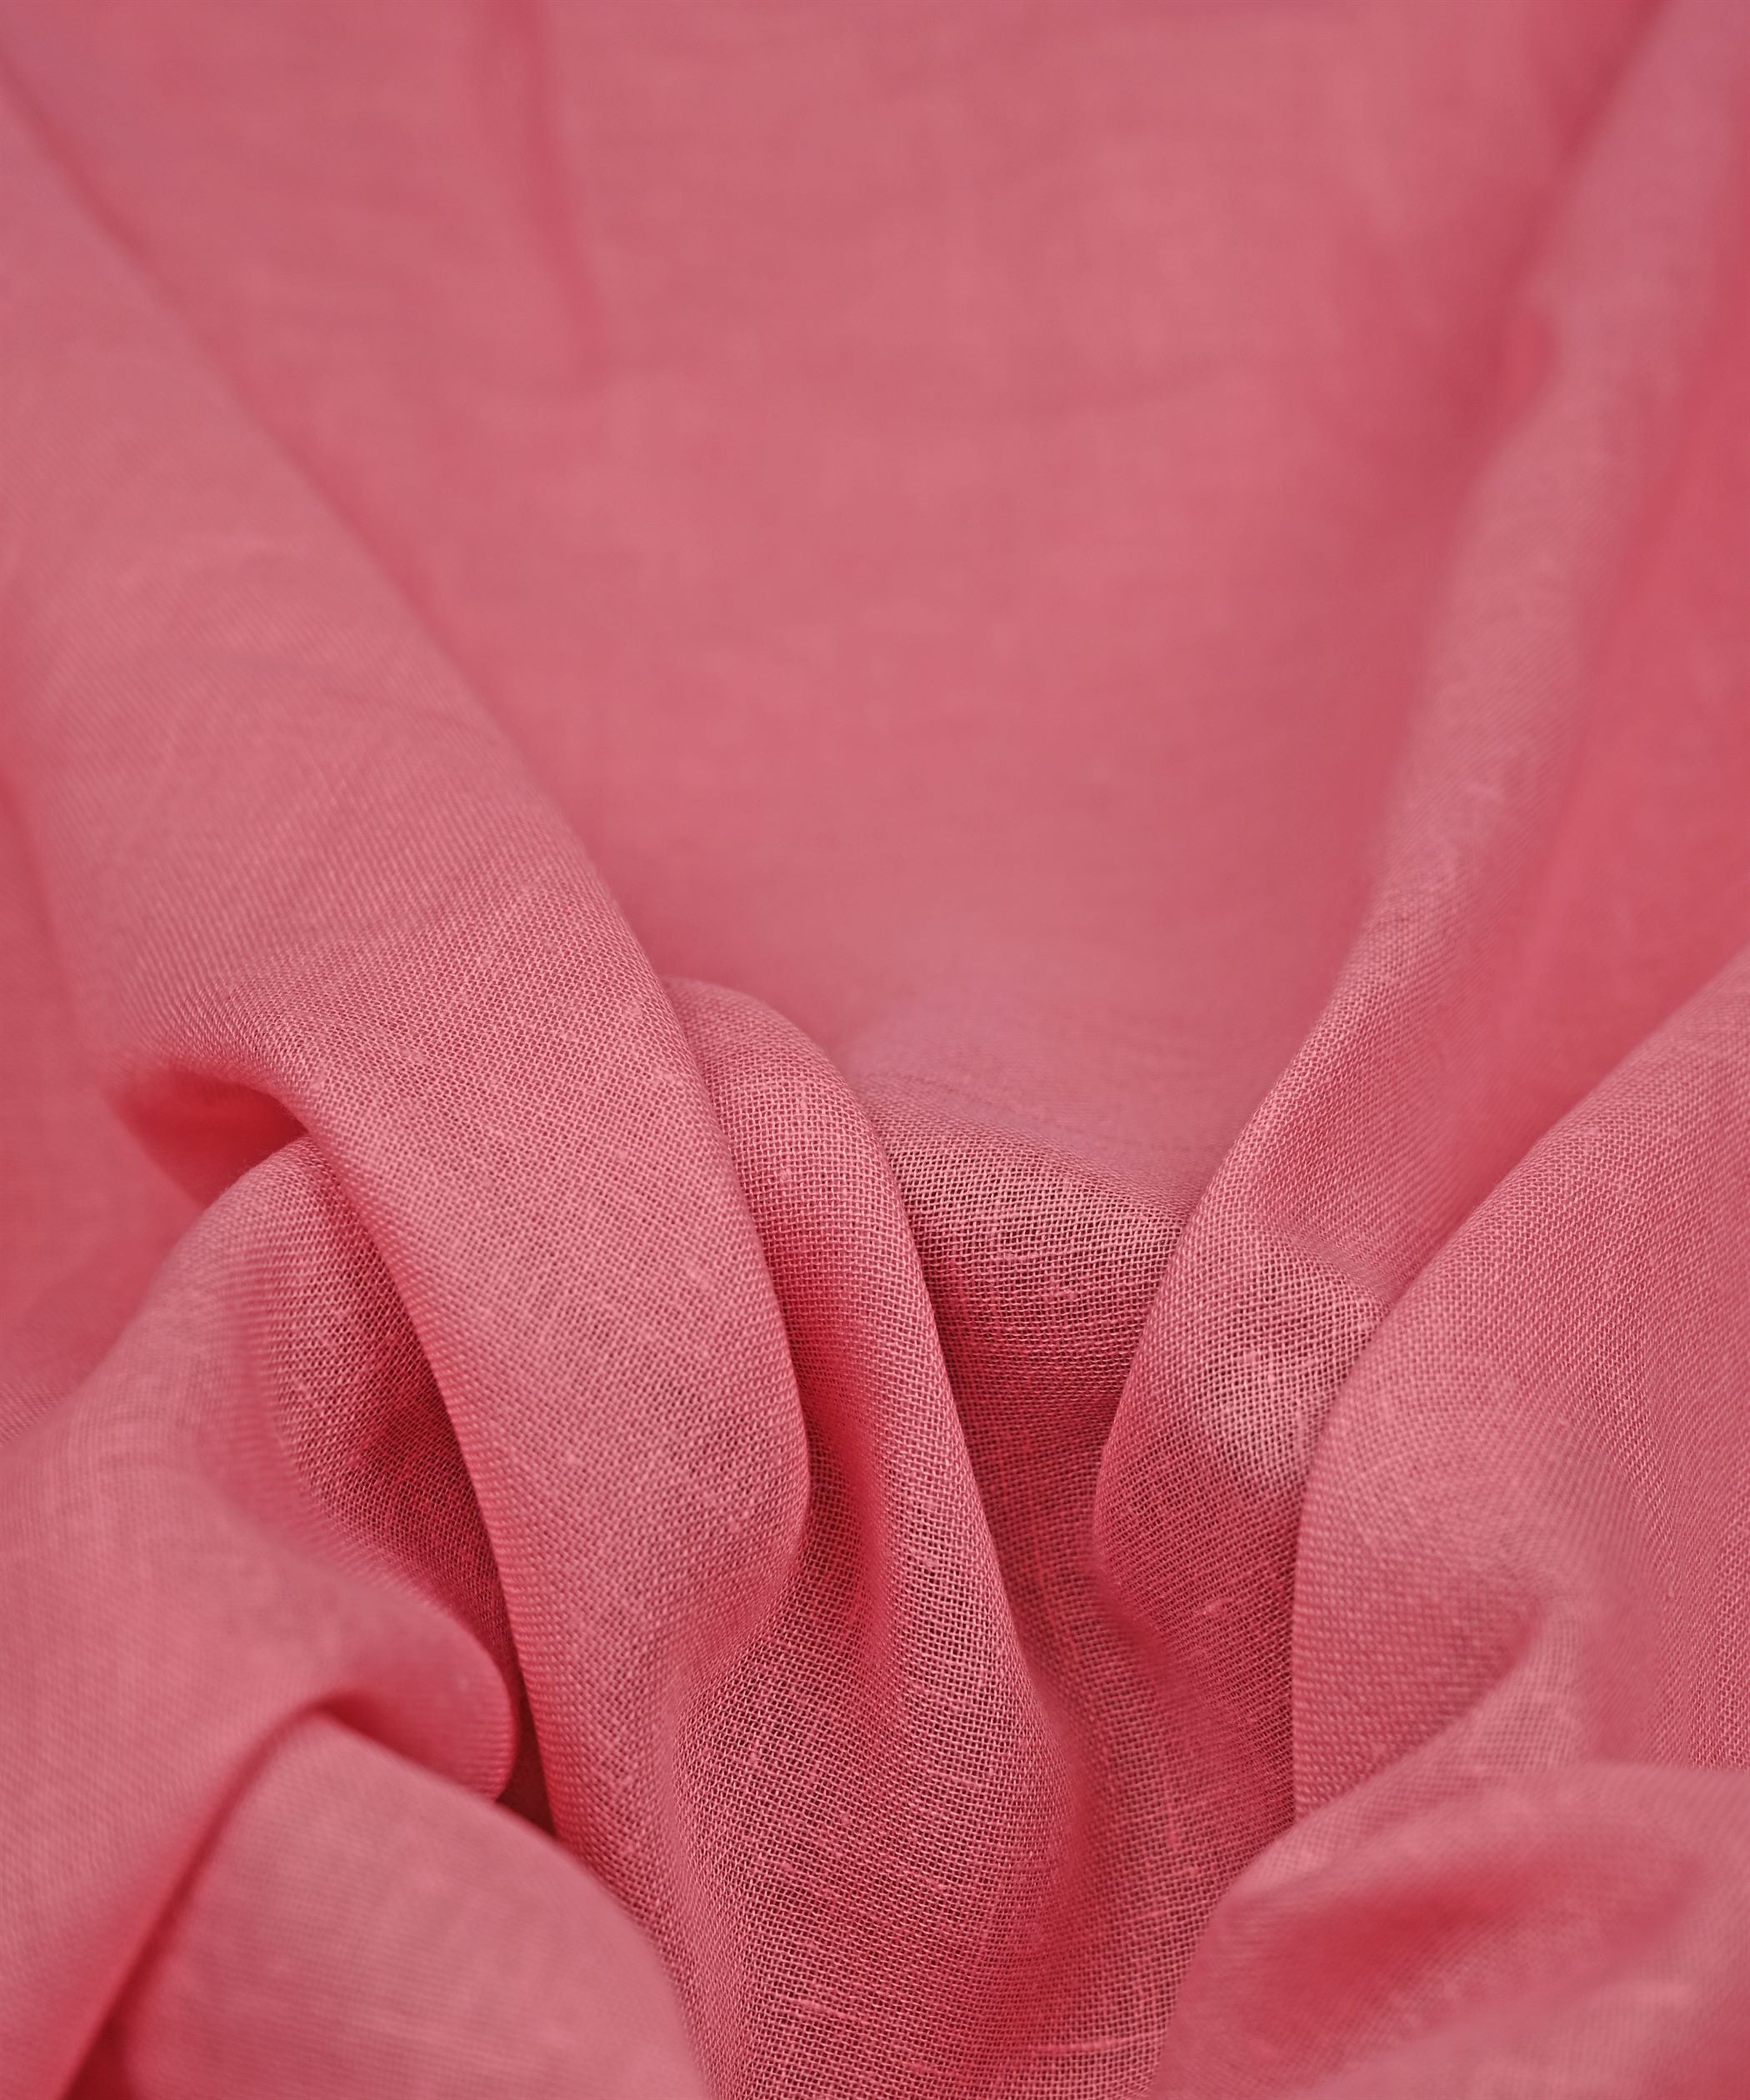 Onion Pink Plain Dyed Poly Linen Fabric